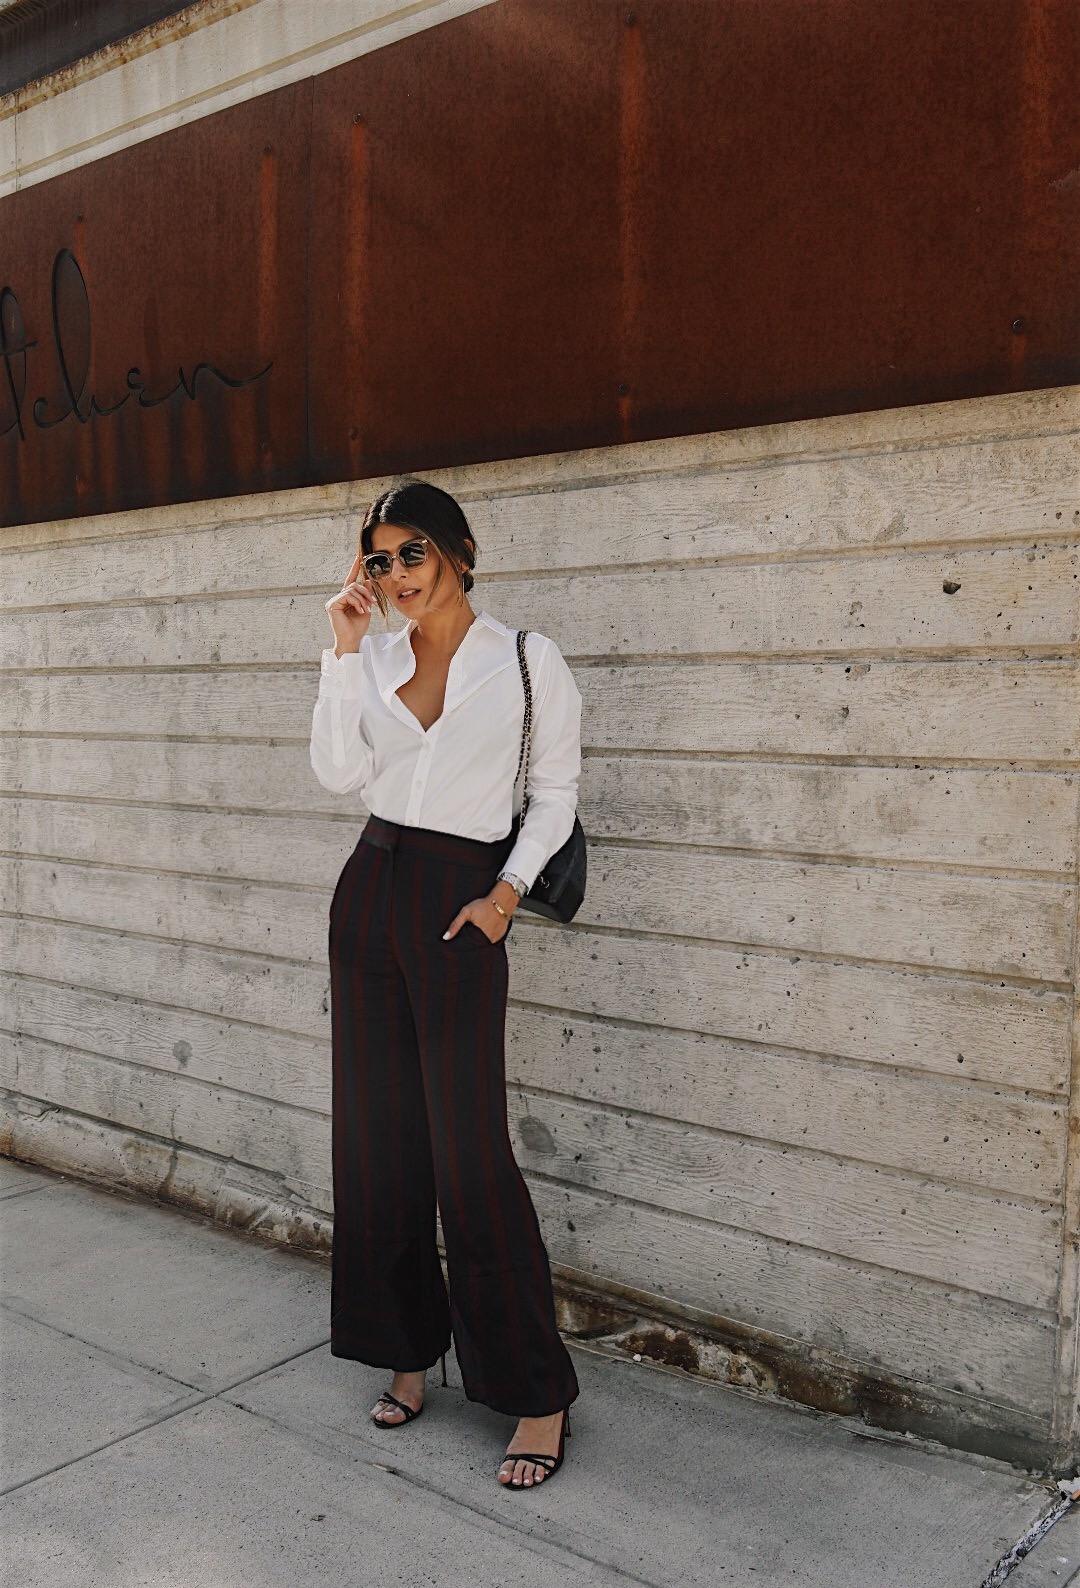 Pam Hetlinger wearing striped pants and a white shirt during NYFW